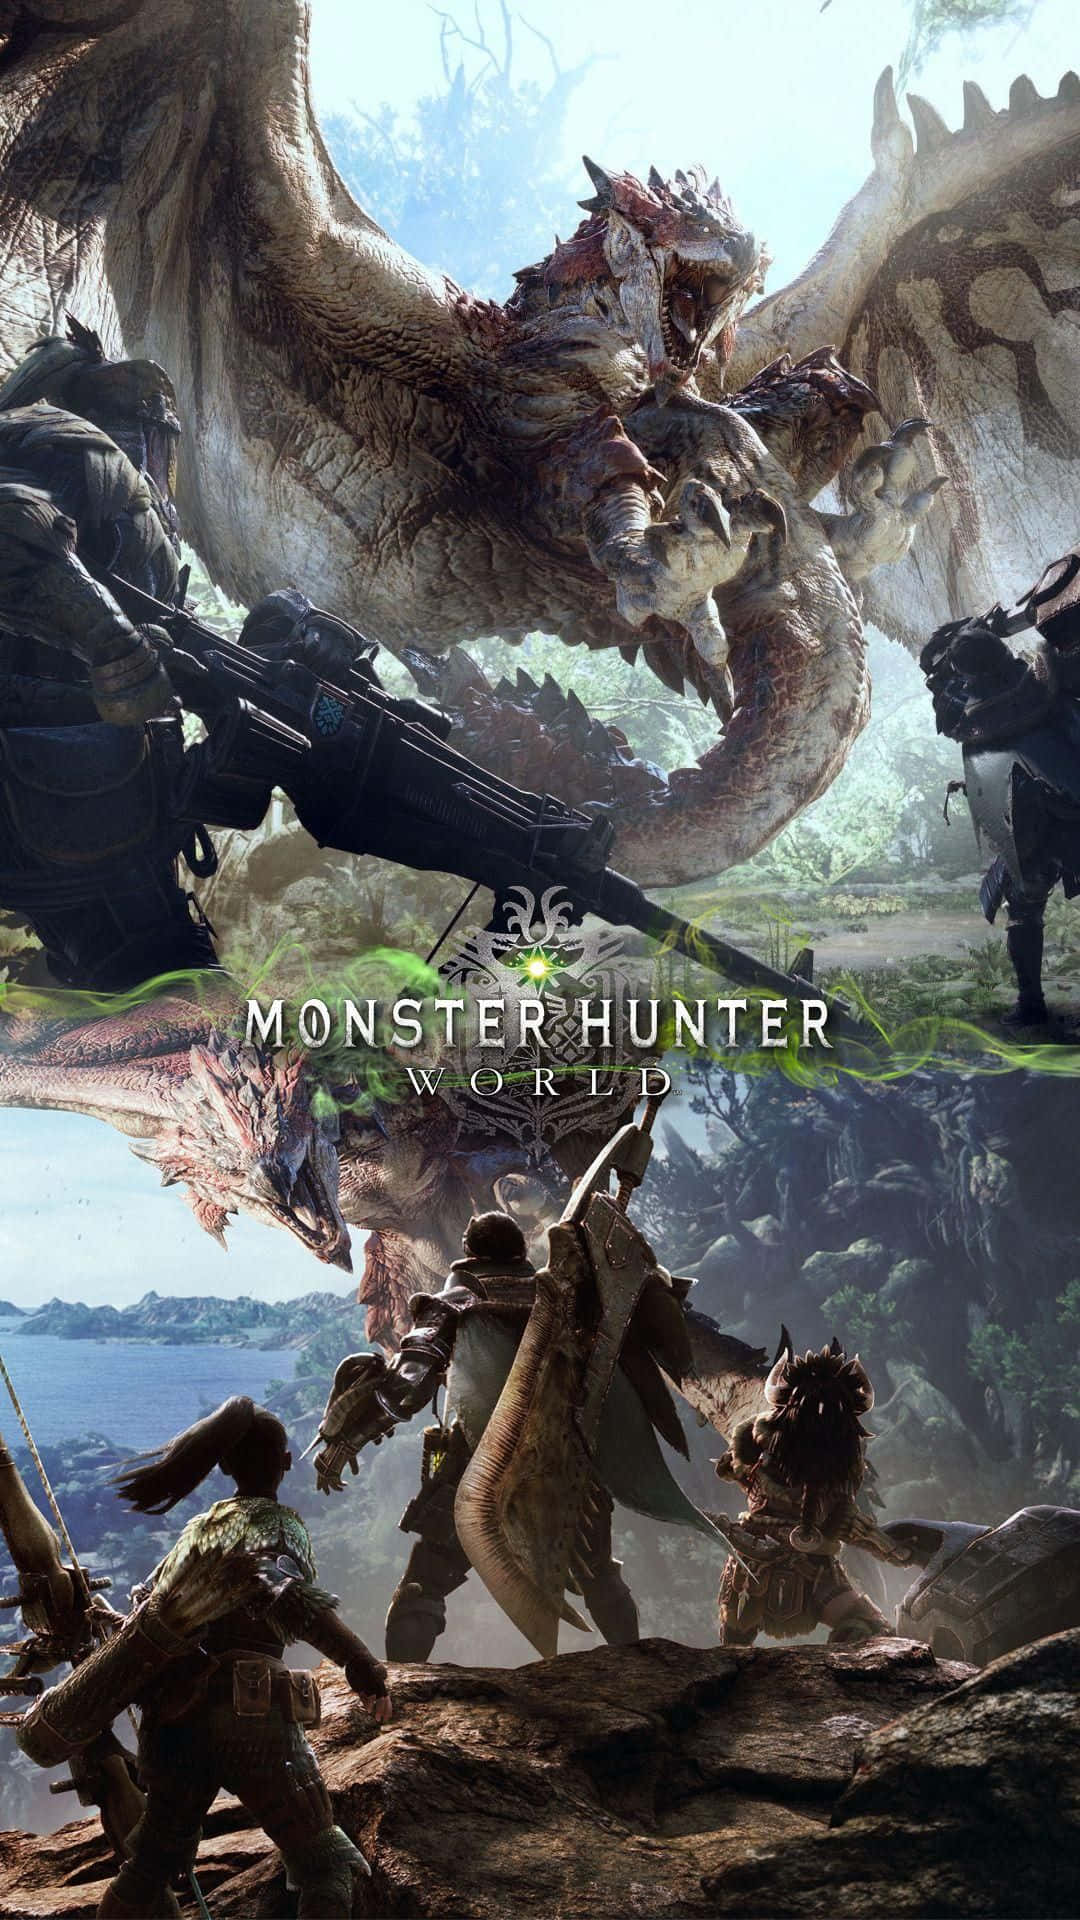 Image  "Adventure Awaits with Android Monster Hunter World"